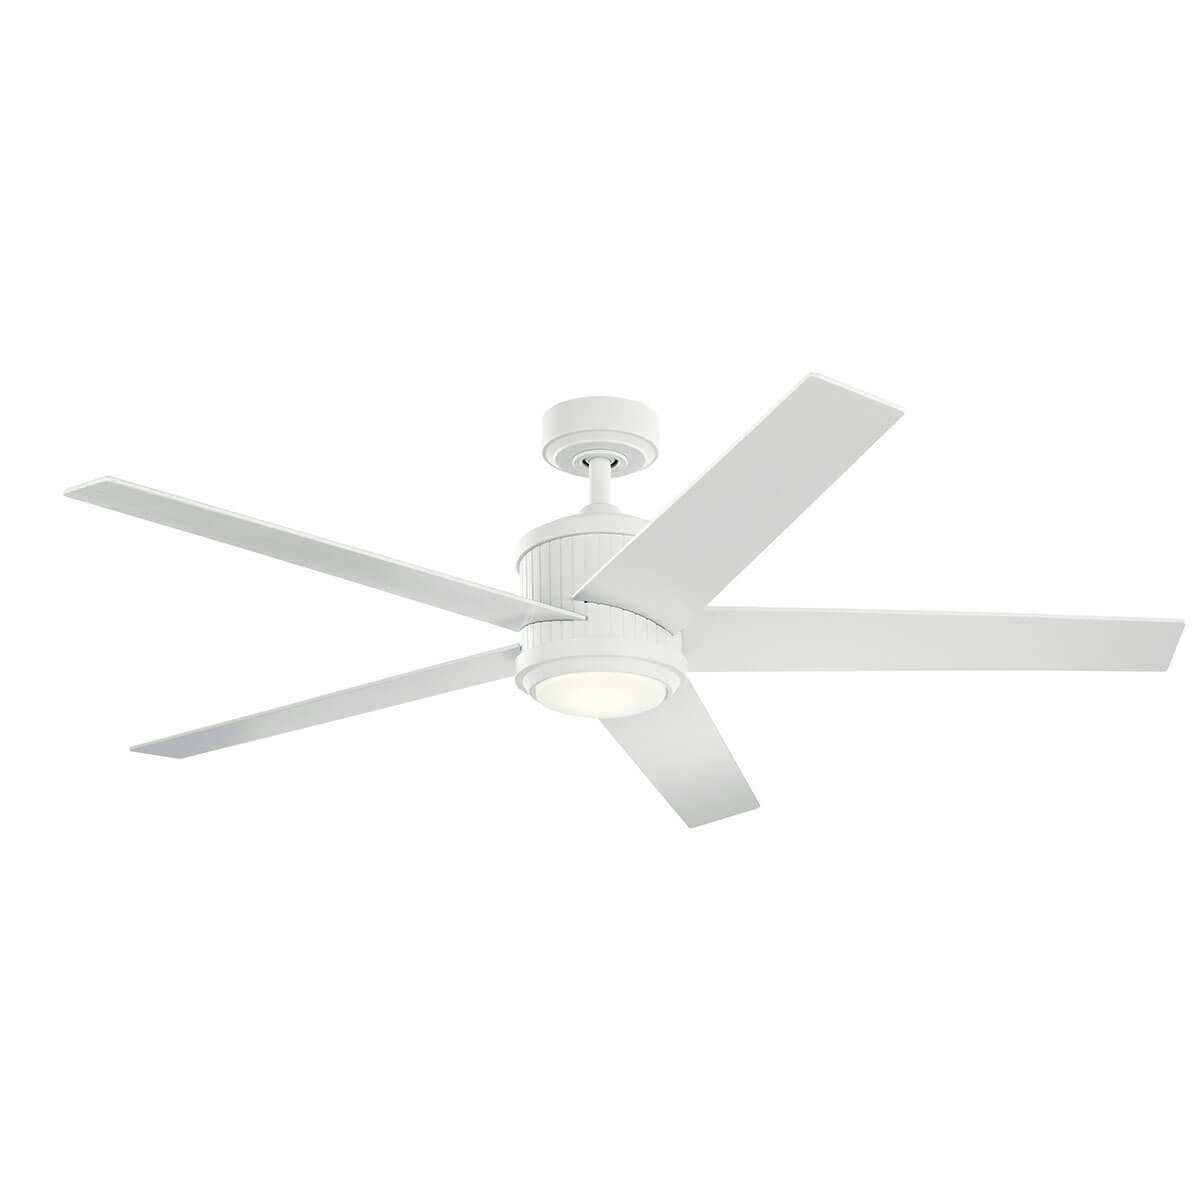 56” Brahm LED Ceiling Fan in Matte  on a white background